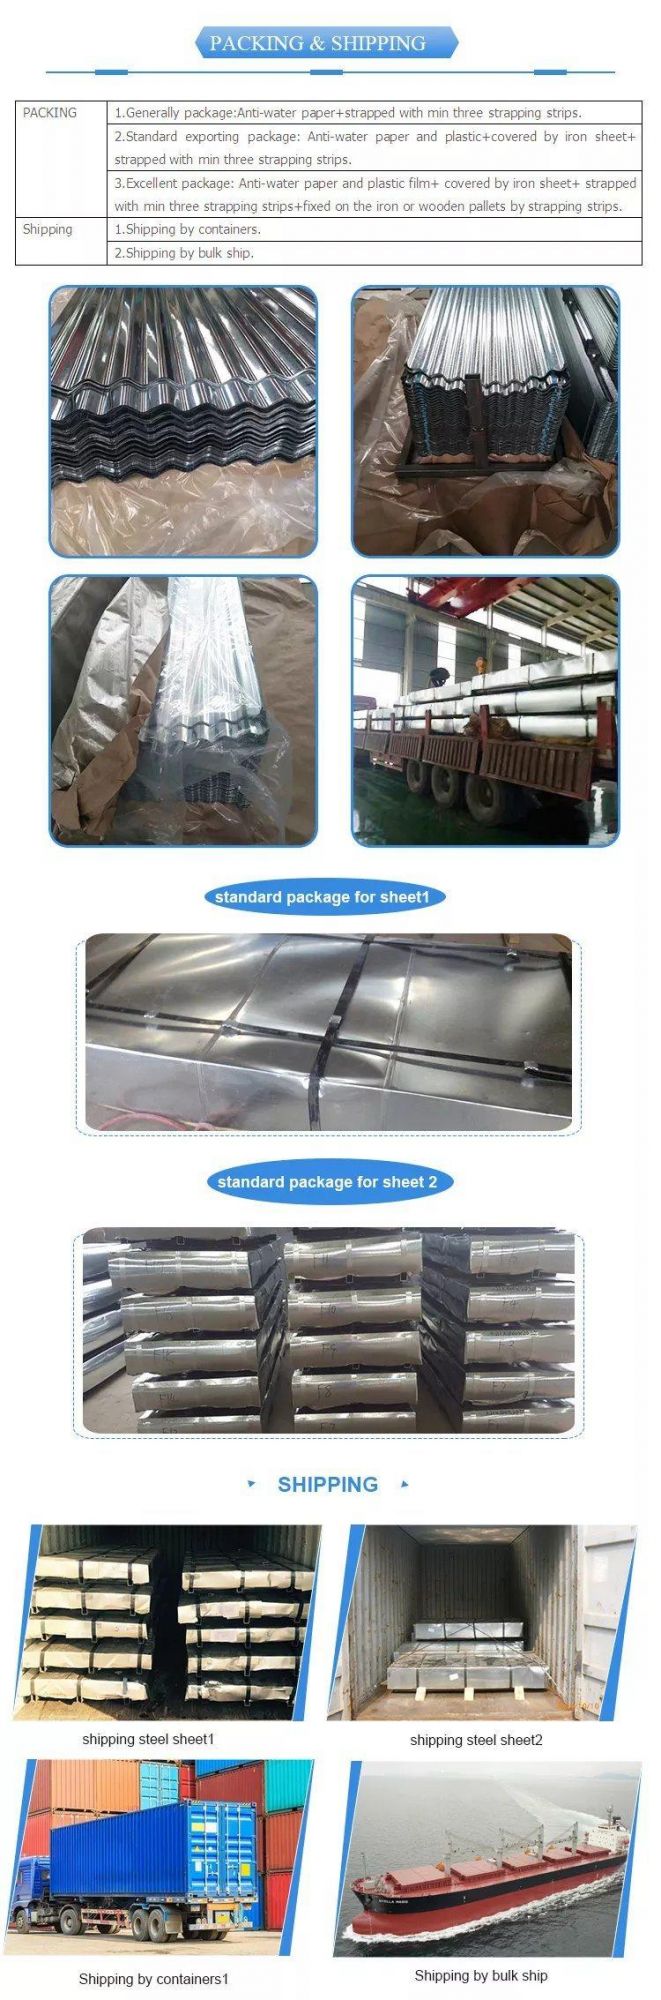 Cheap Price Gi Corrugated Roofing Sheets Galvanized Corrugated Iron Sheet Zinc Metal Roofing Sheet